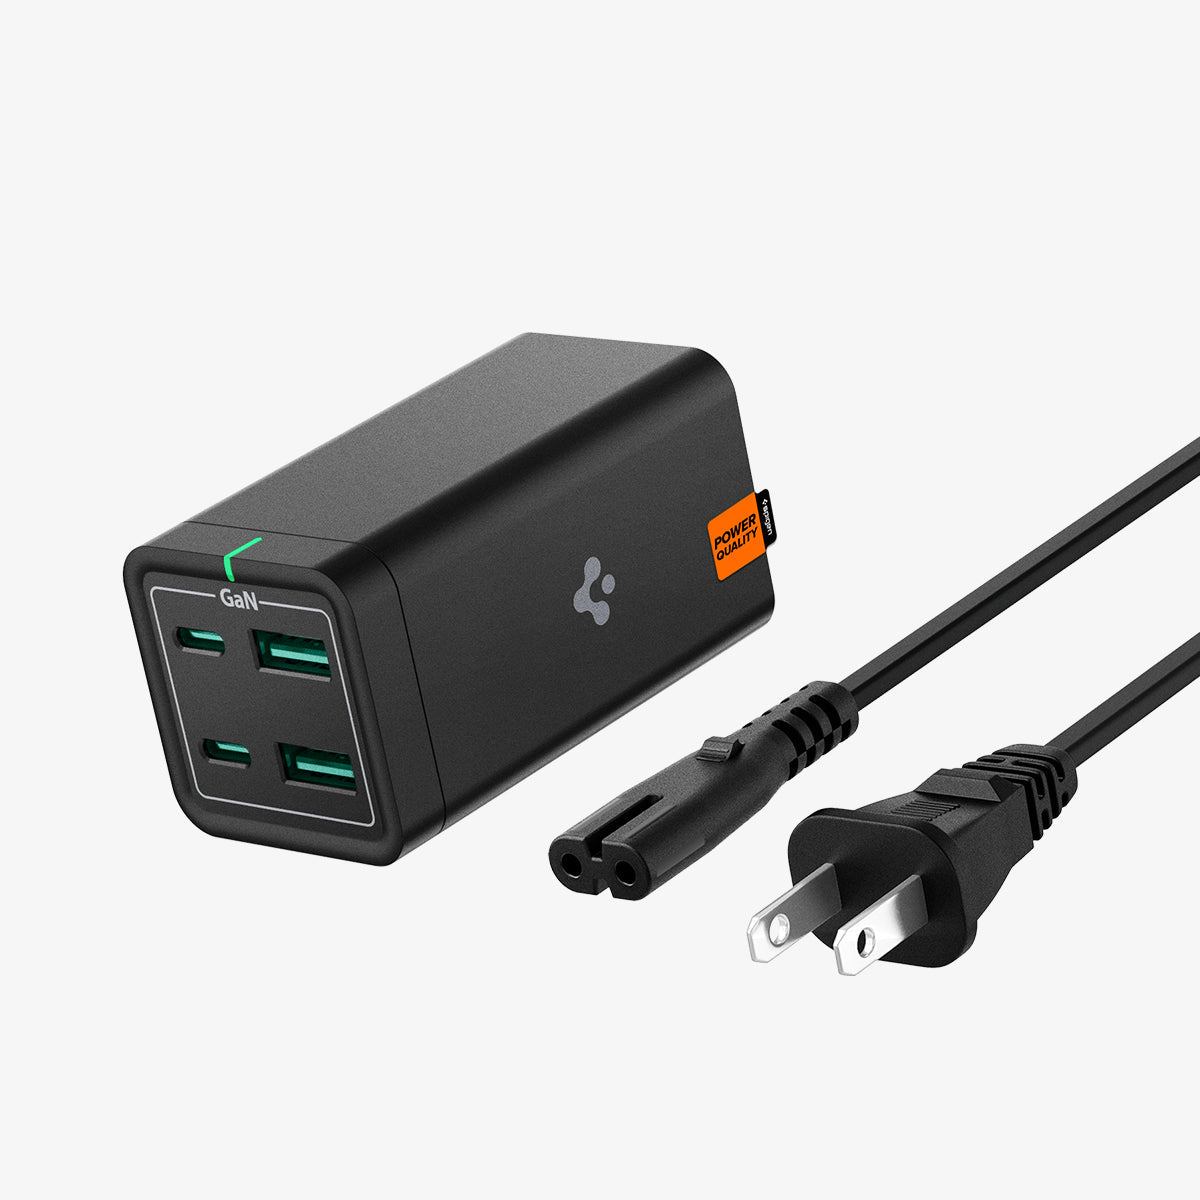 ACH03787 - Spigen ArcDock 65W Desktop Charger PD2101 in black showing the front, side and top with power cable next to it